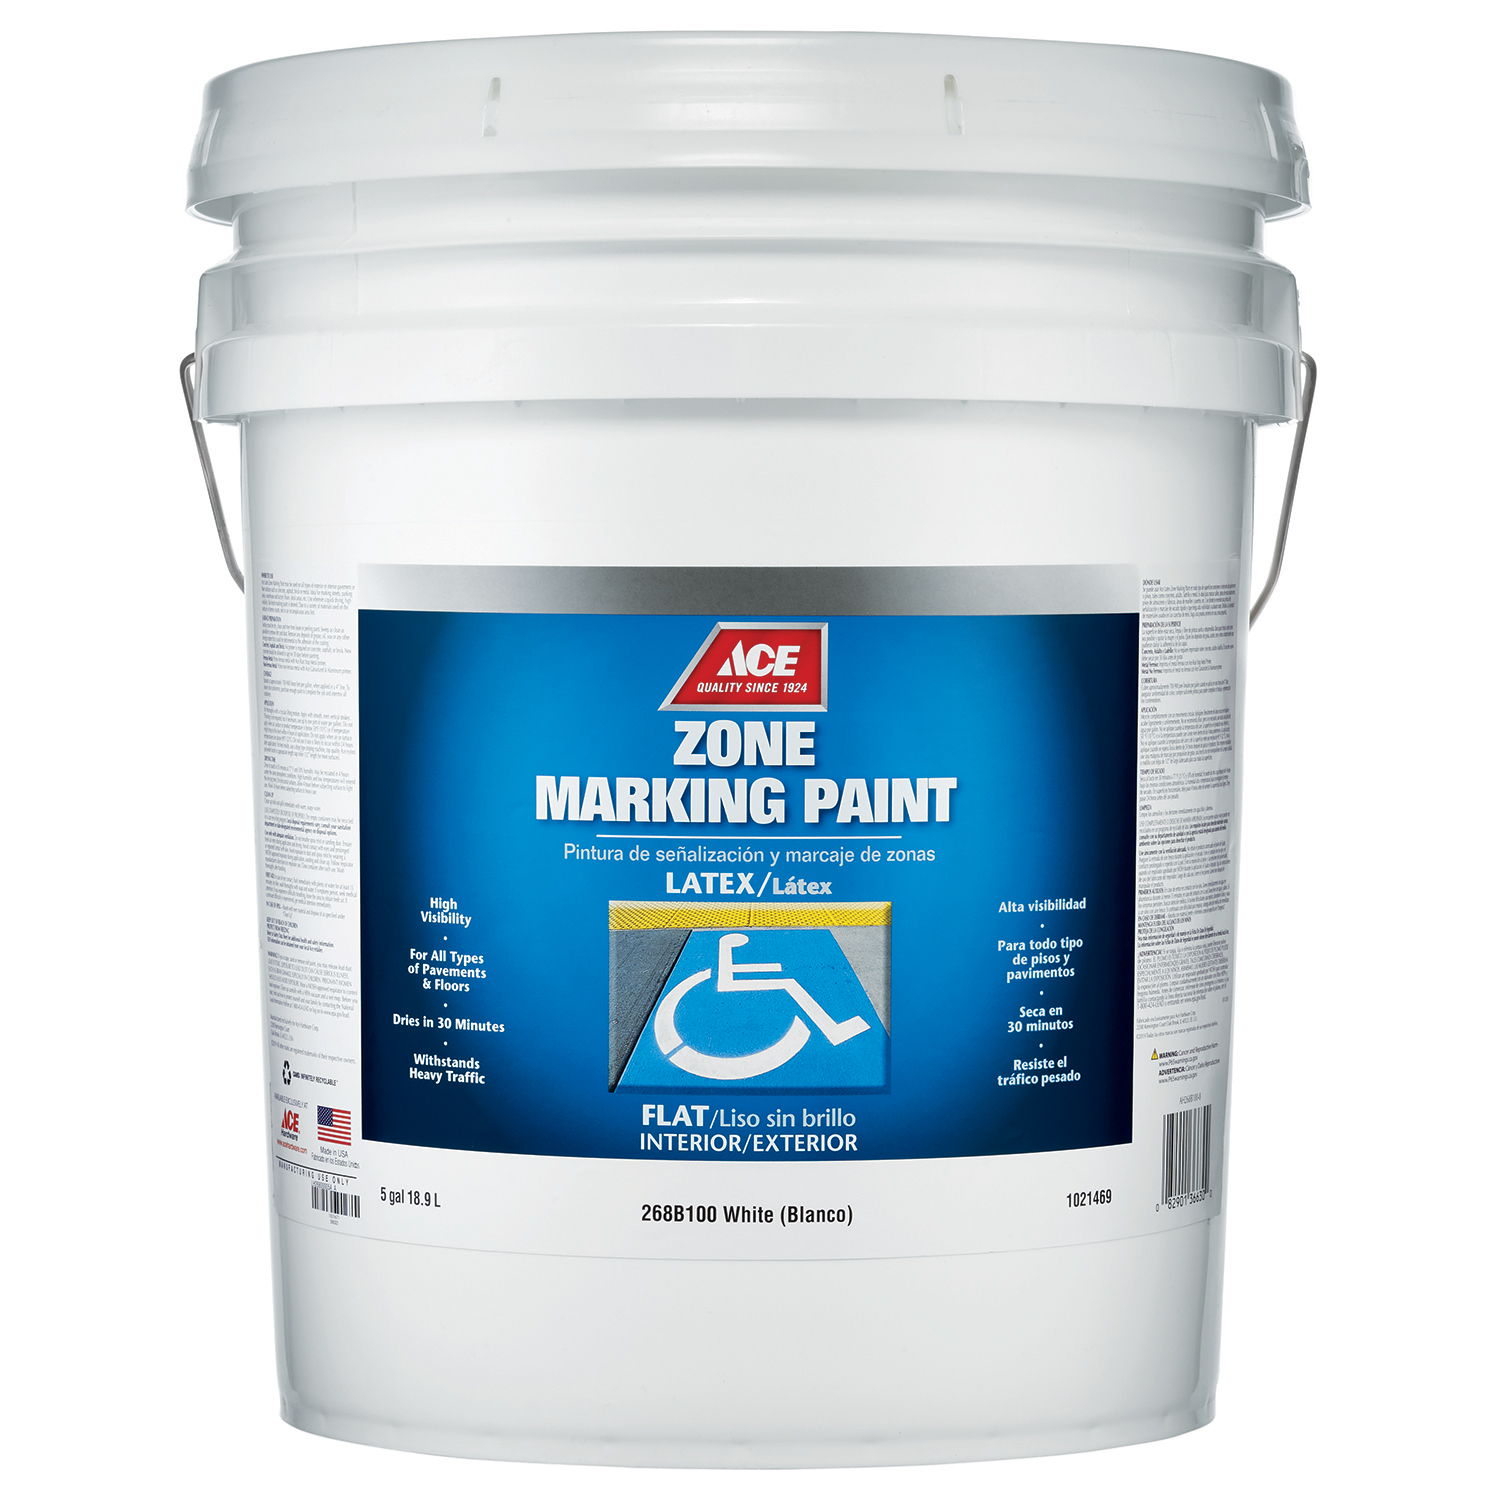 Ace White Zone Marking Paint 5 gal